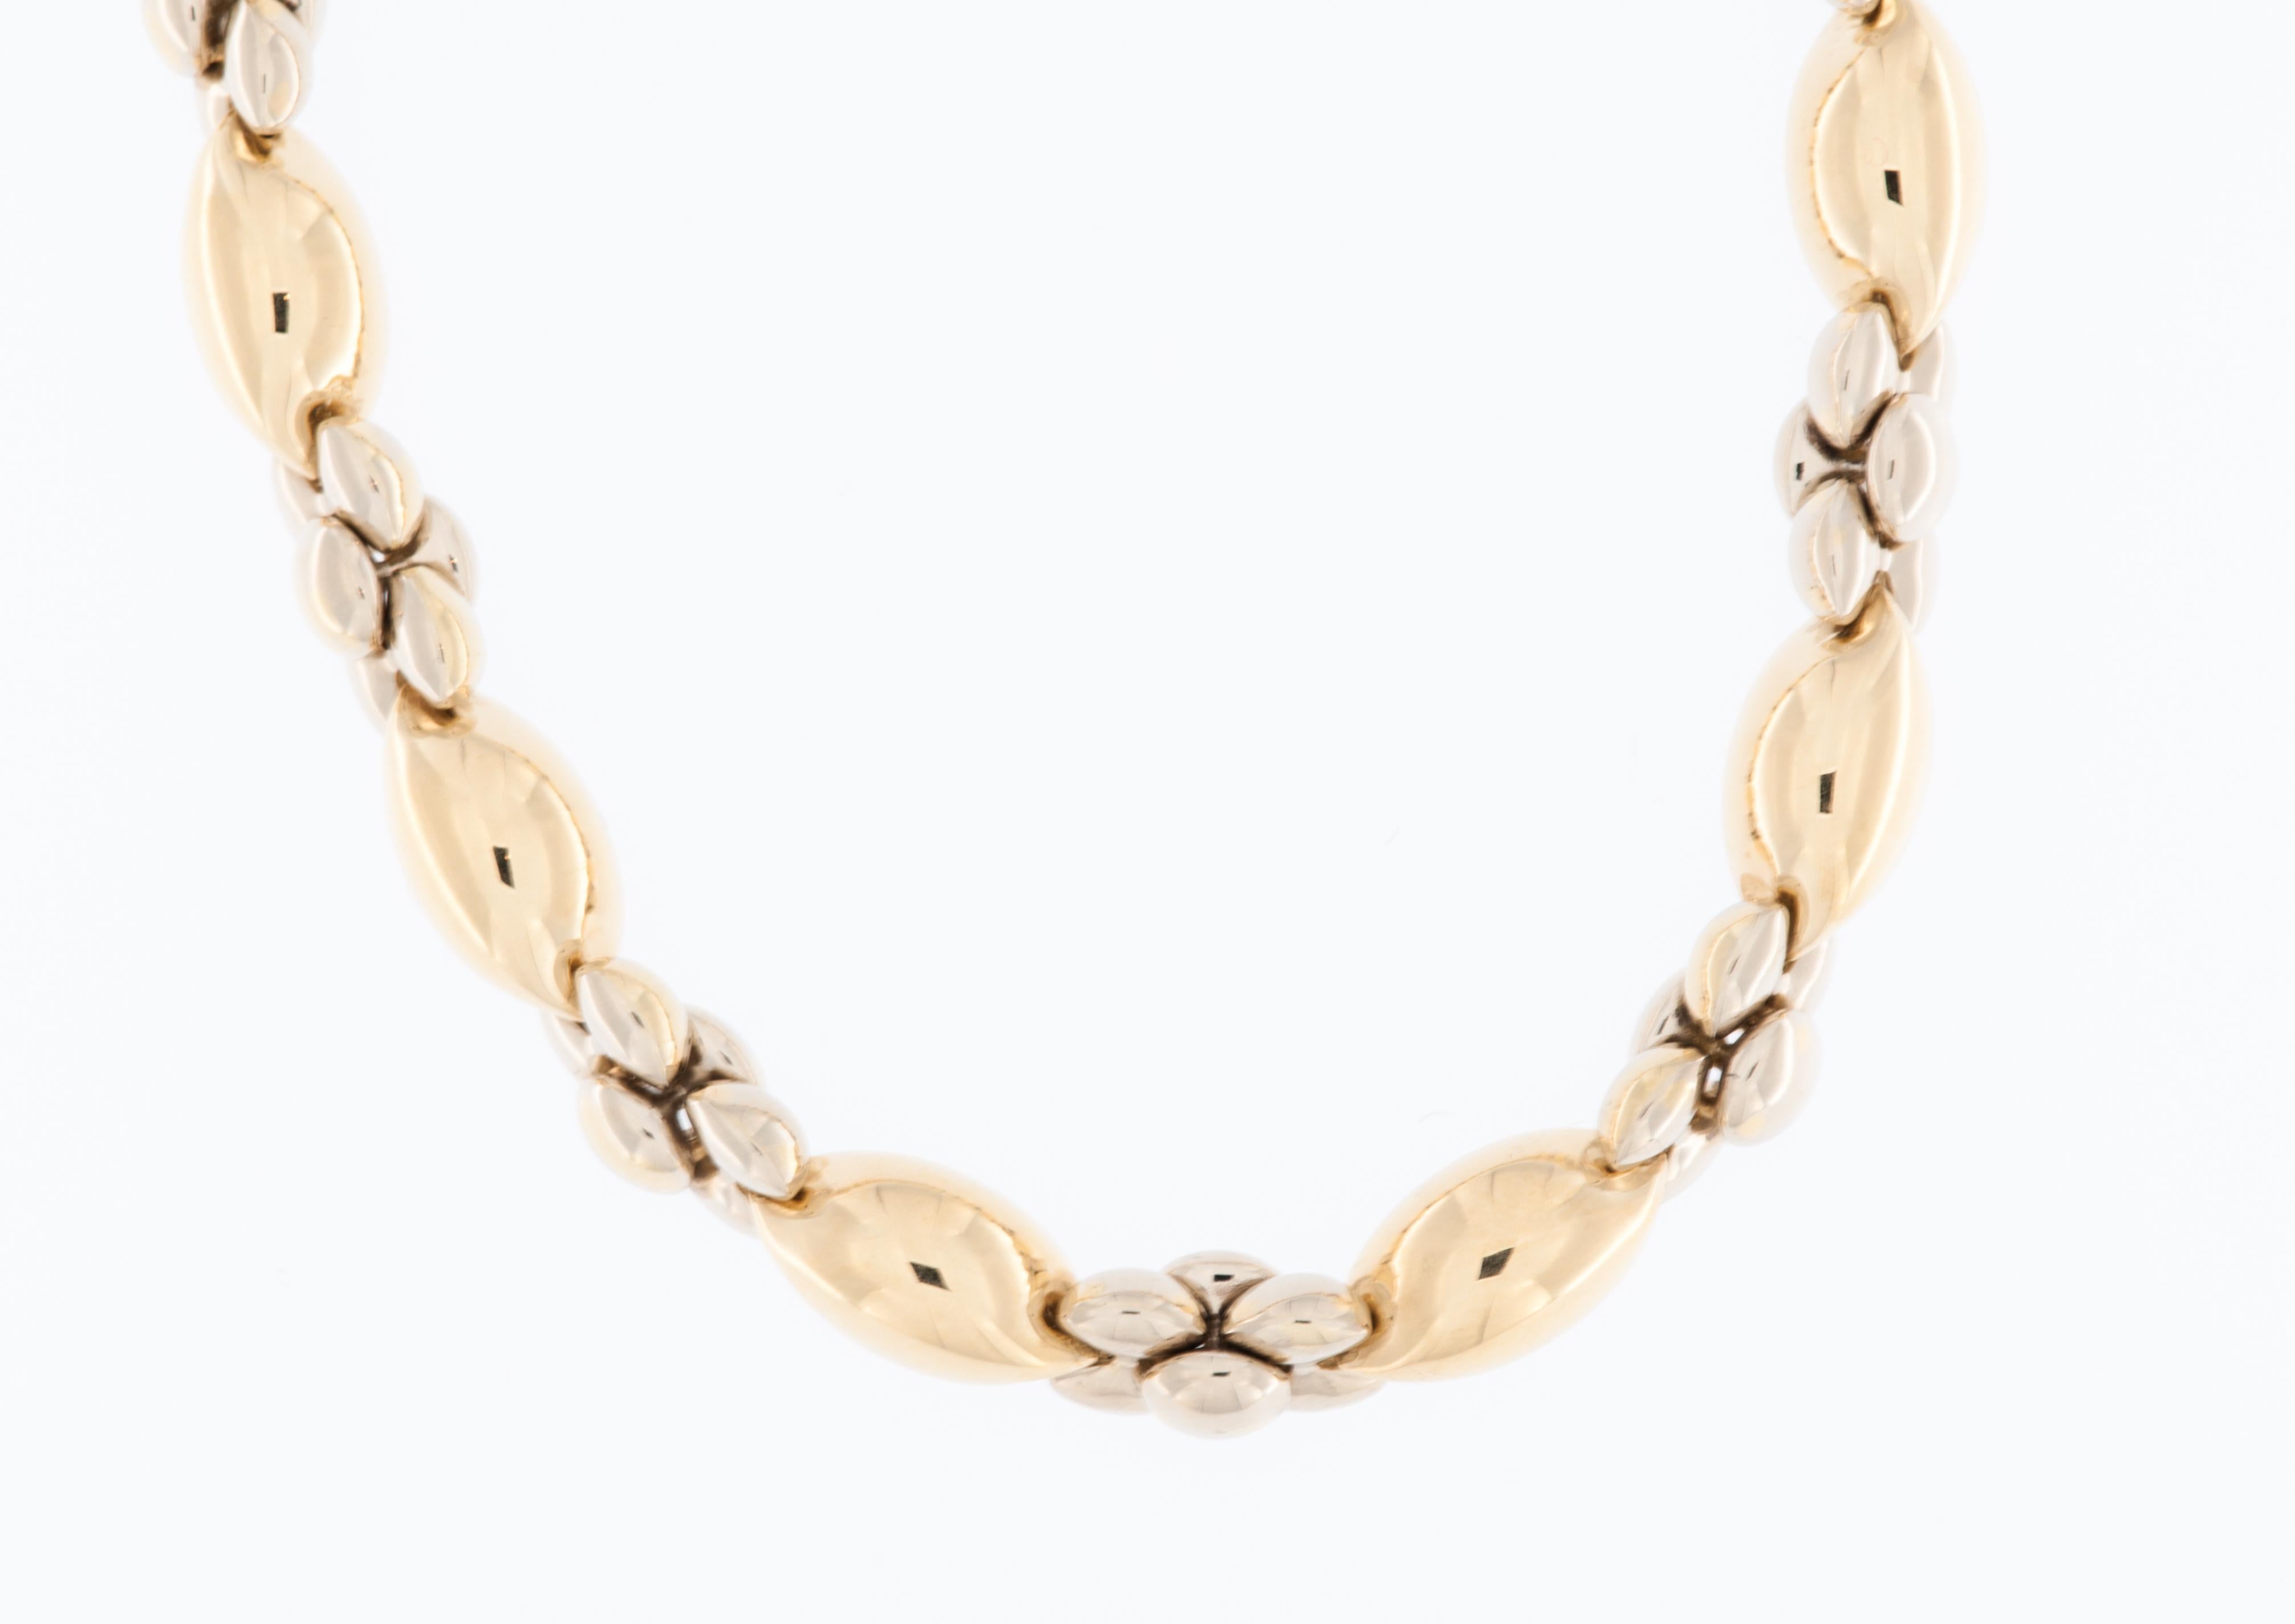 The Spanish Vintage 18kt Yellow Gold Necklace is a stunning piece of jewelry that combines traditional craftsmanship with timeless elegance. 

The necklace is made from 18-karat (18kt) yellow gold. This high purity gold is known for its rich, warm